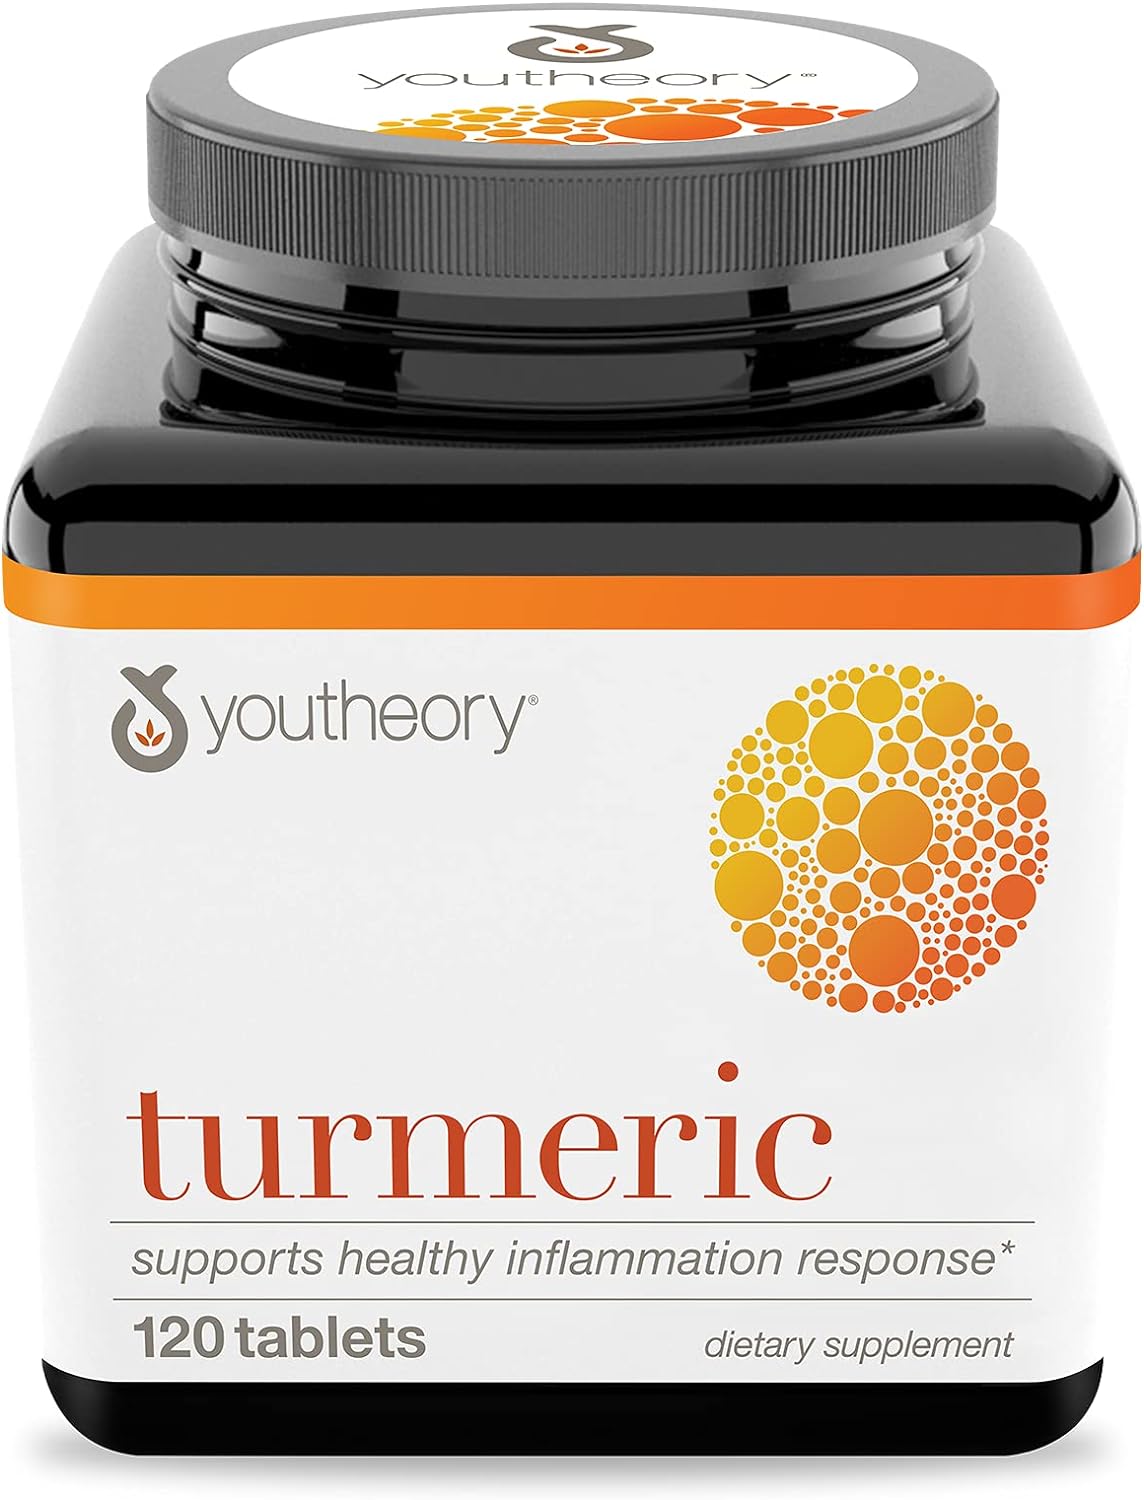 Youtheory Turmeric Curcumin Supplement with Black Peppe